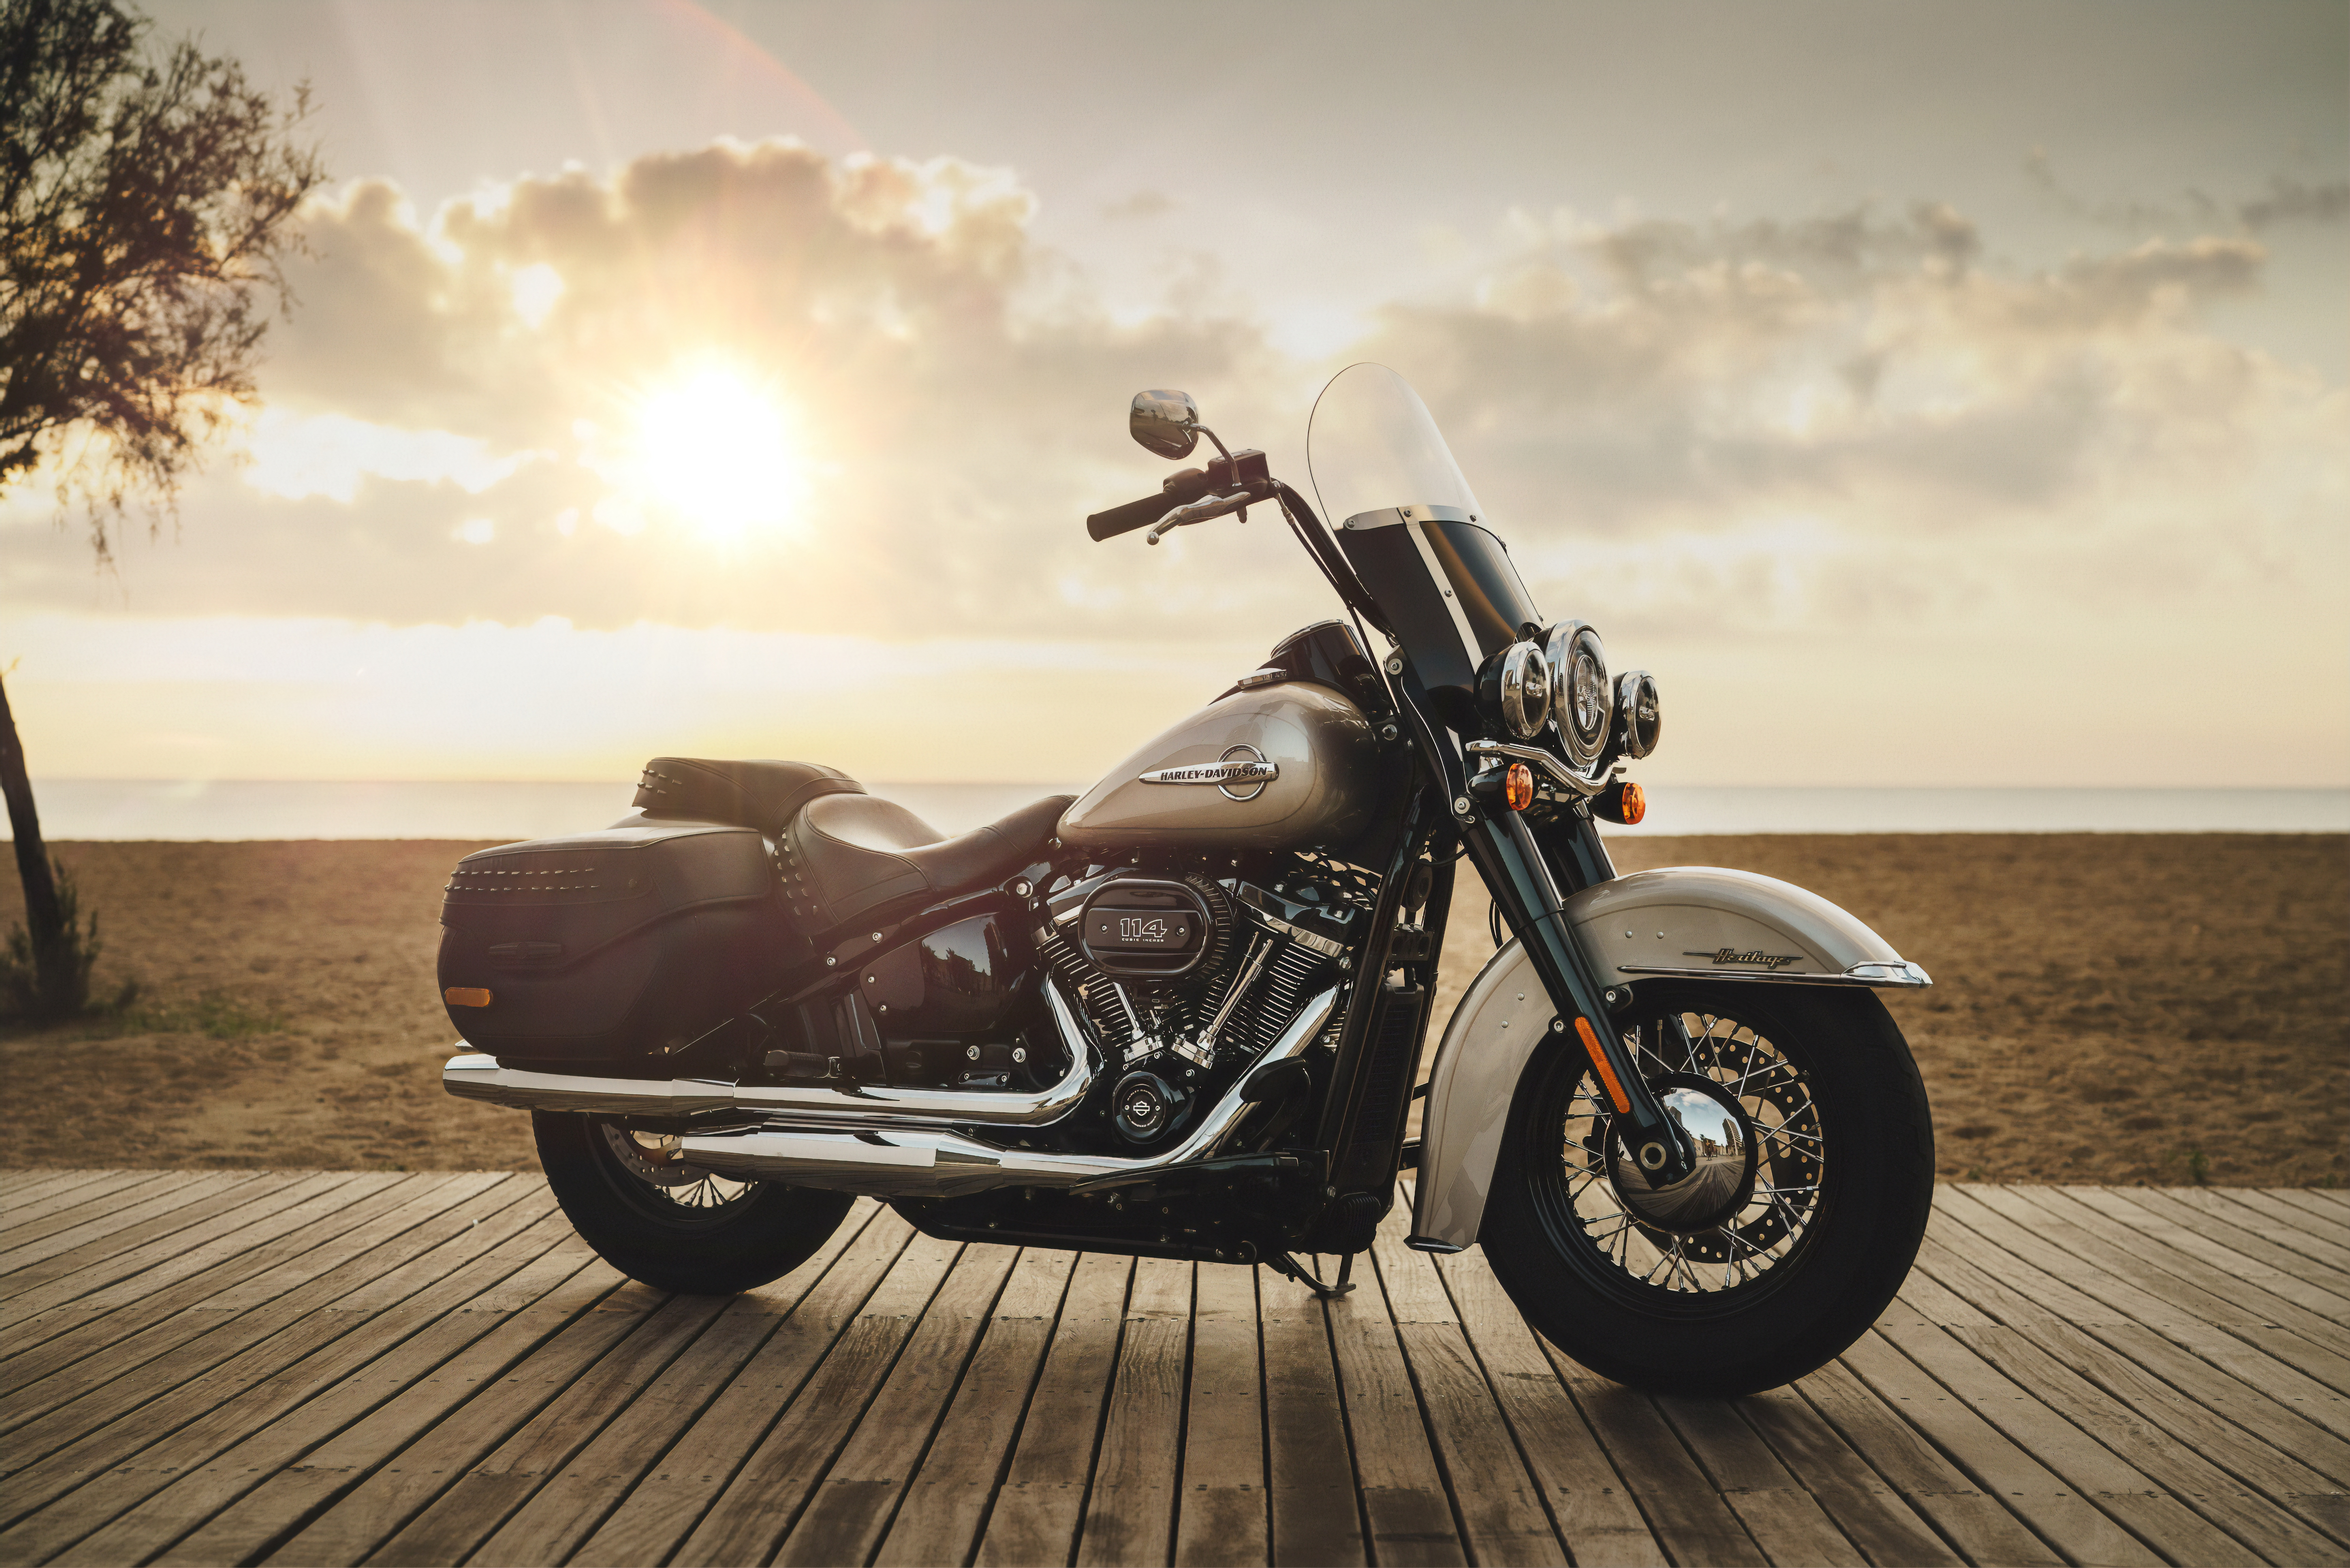 harley davidson, motorcycles, horizon, shore, bank, side view, motorcycle, bike for android